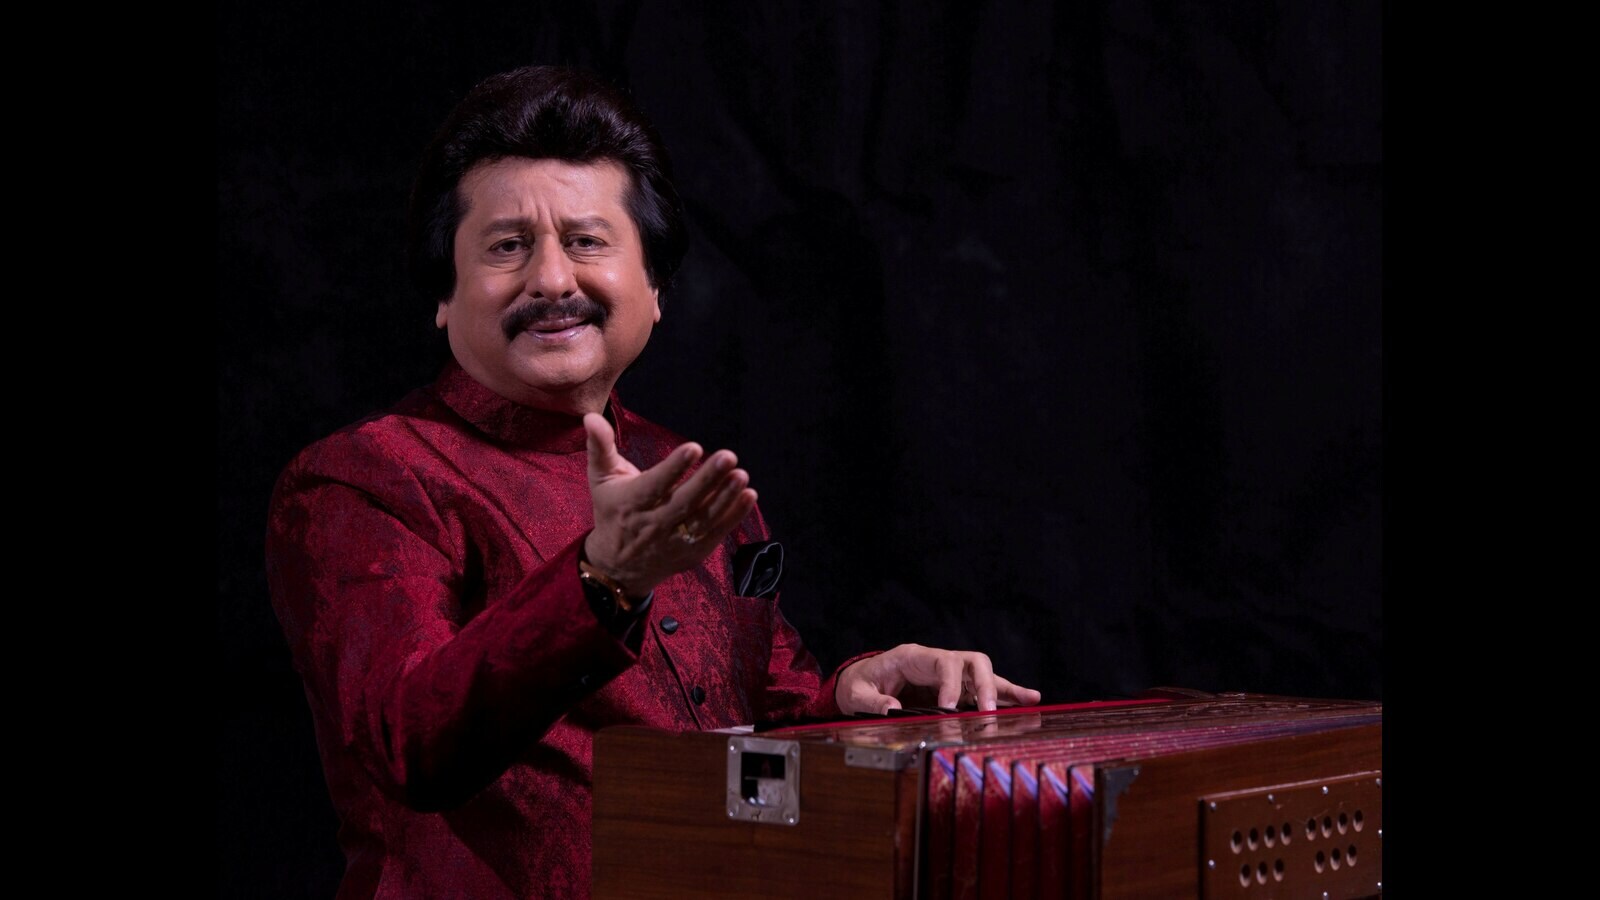 Pankaj Udhas: I was nervous when I got back on stage after two years